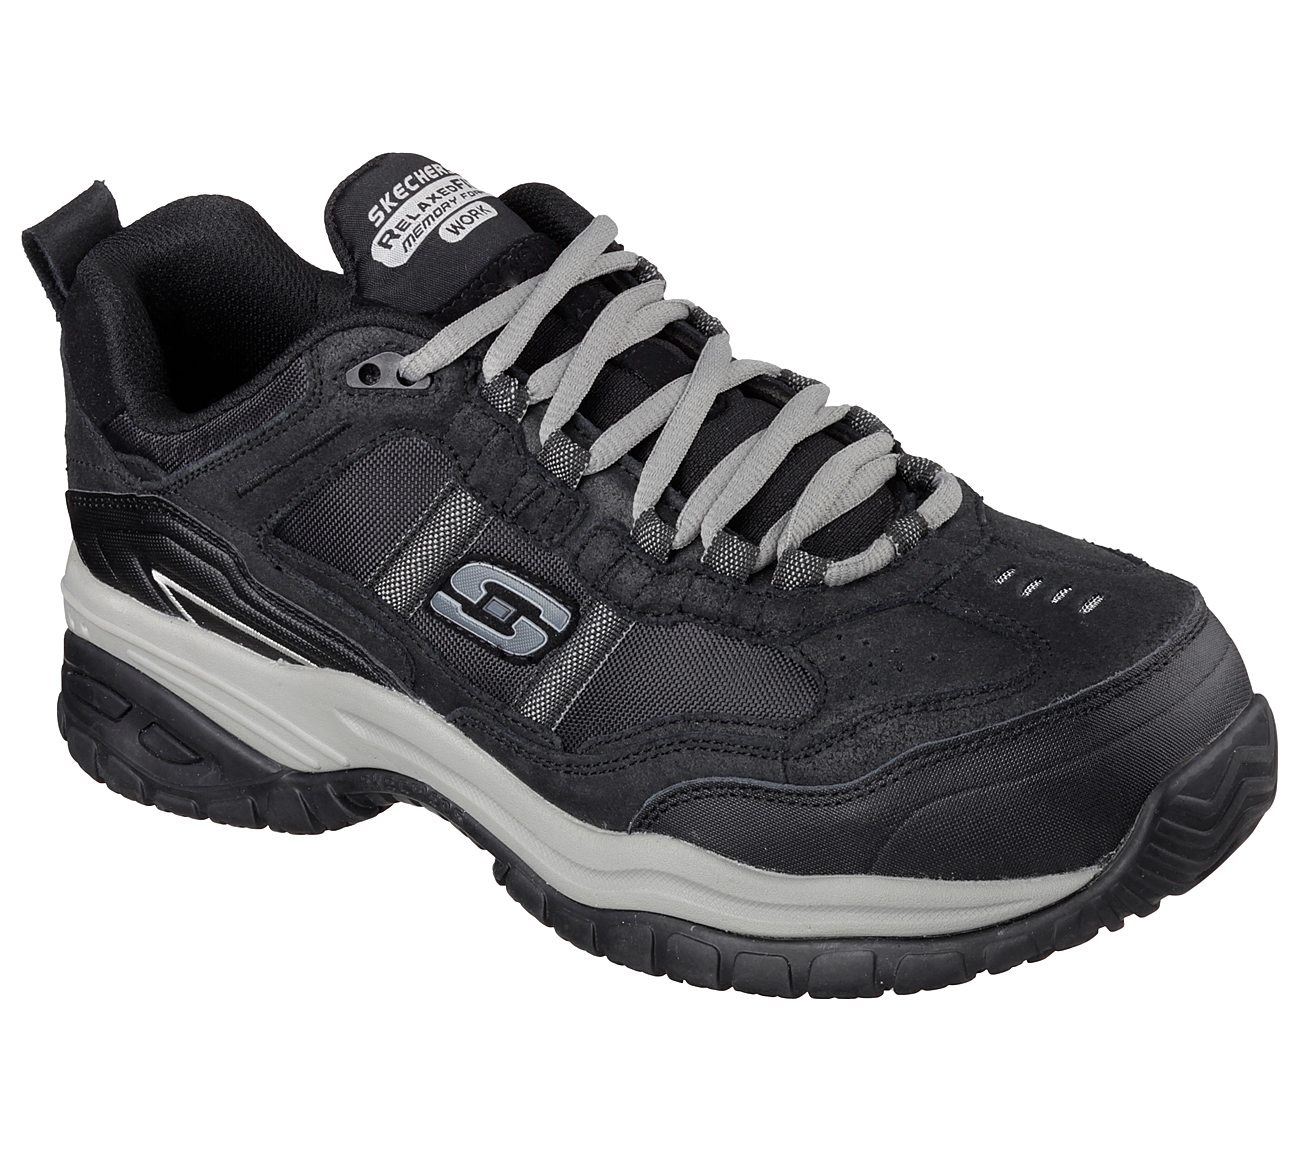 sketchers shoes hover to zoom FWPACGL